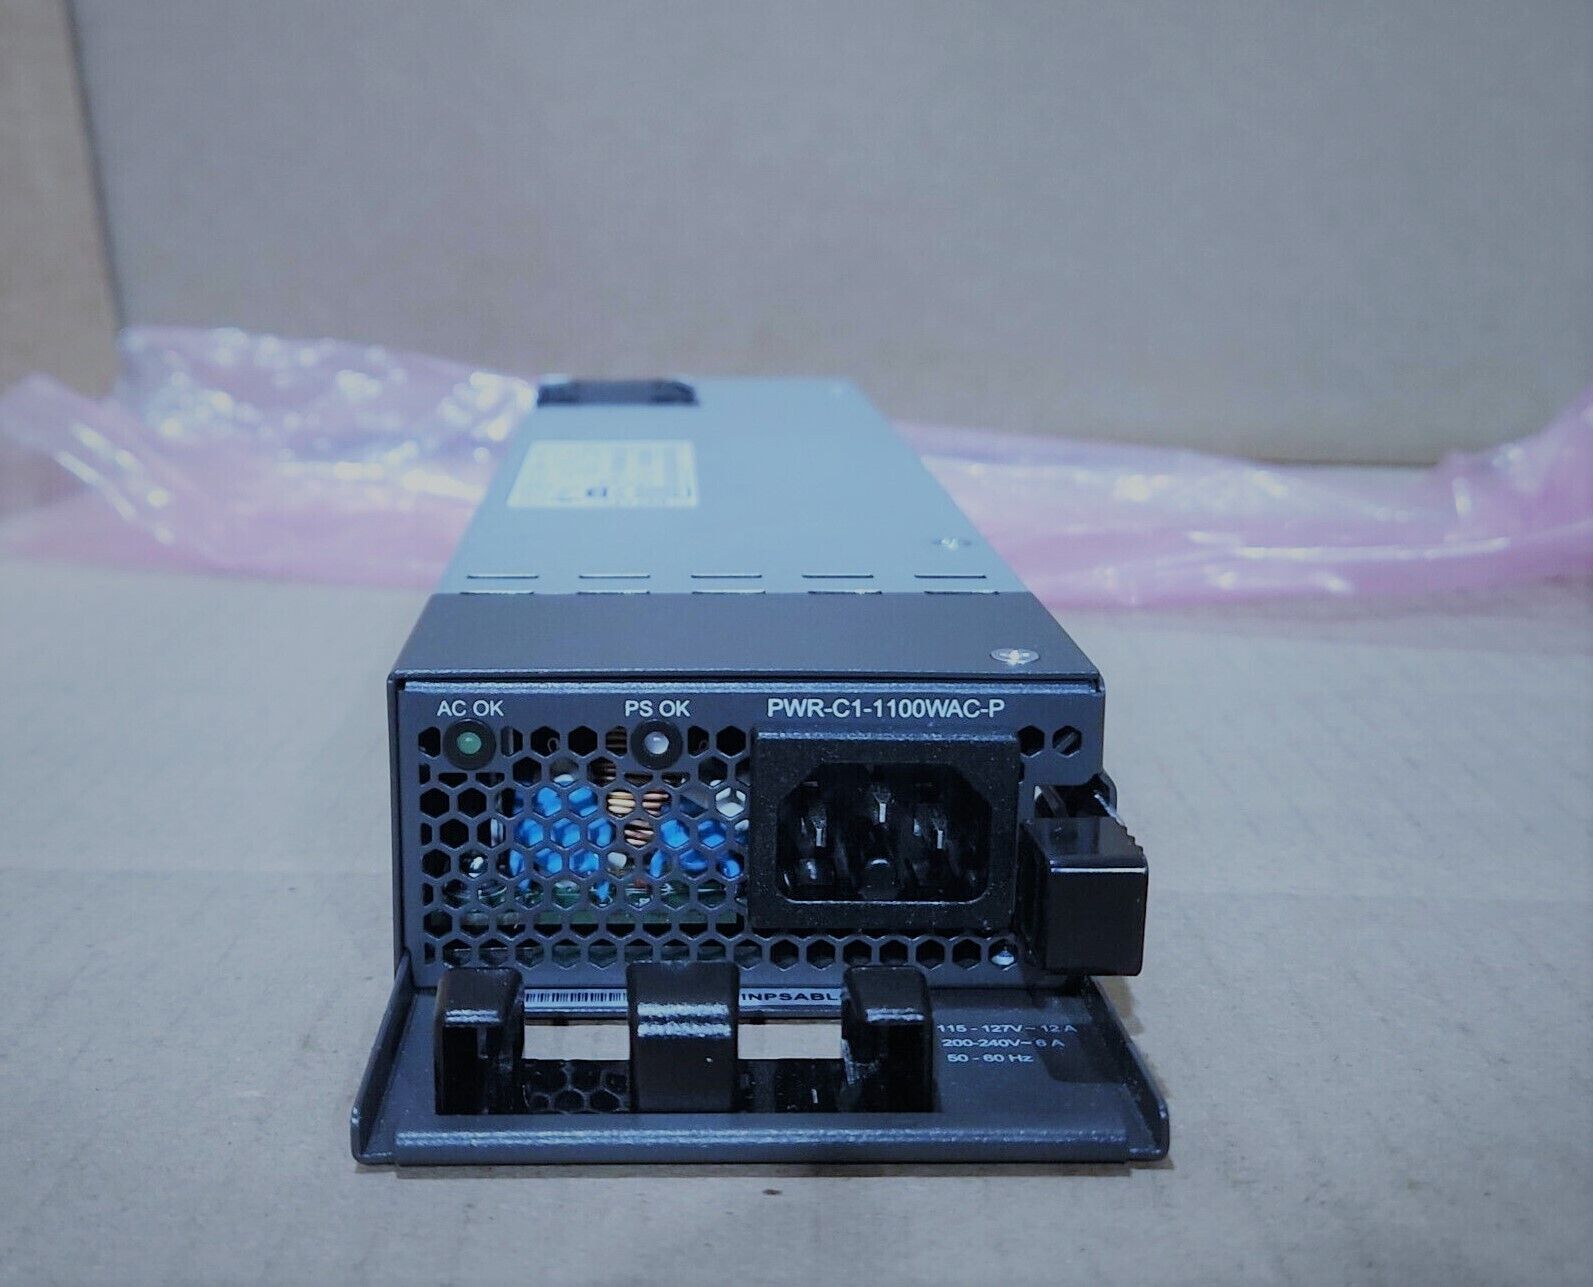 Cisco PWR-C1-1100WAC-P Power Supply for 9300 Series Switch